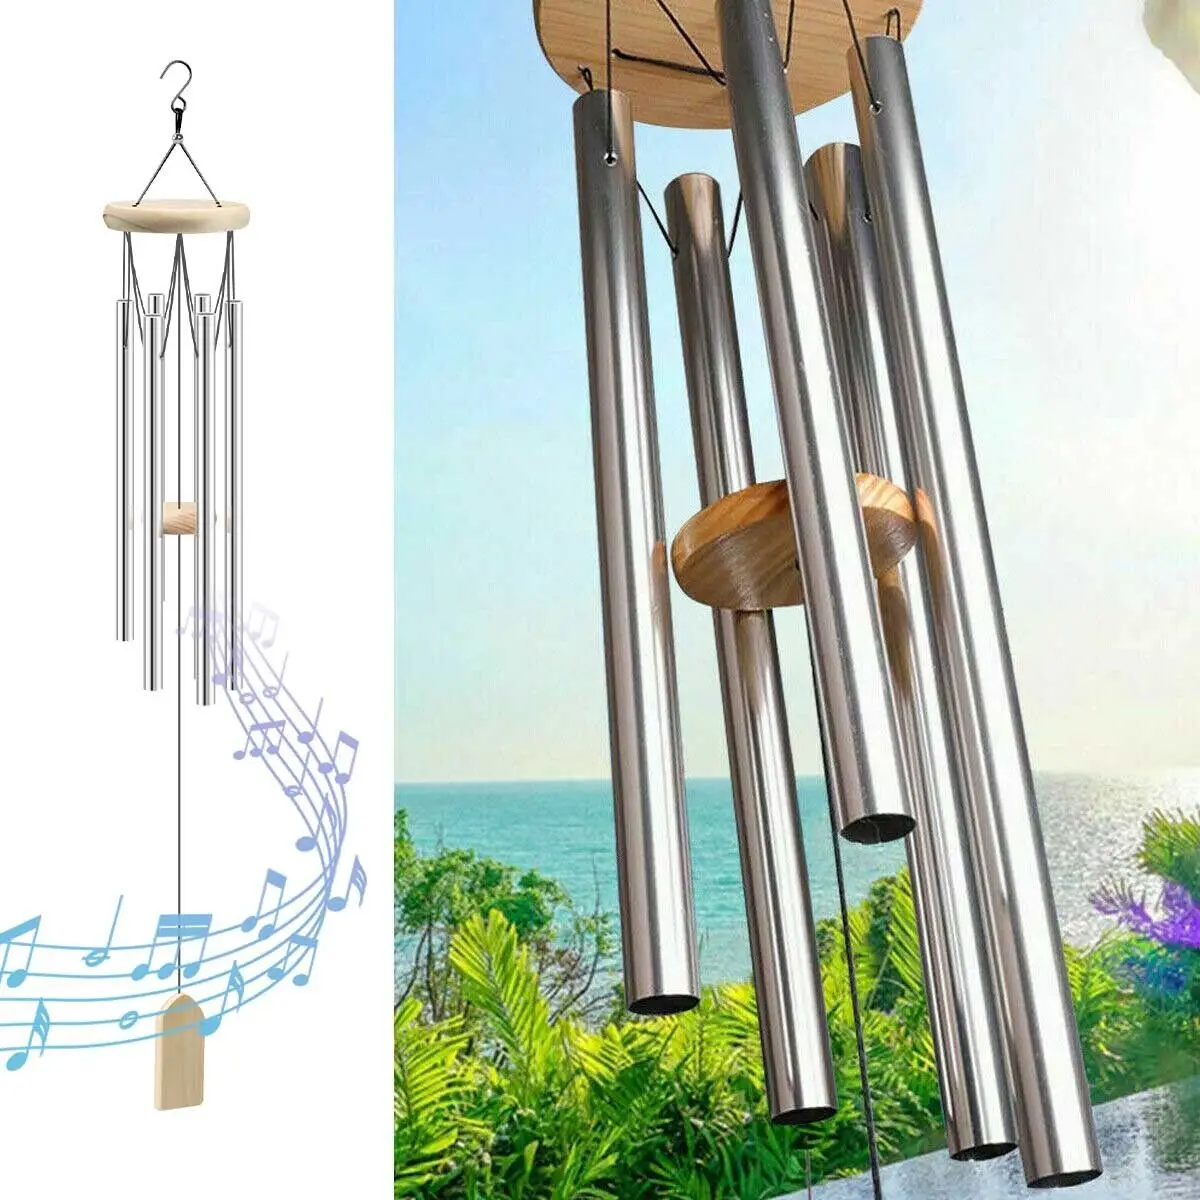 6 Tubes Wind Chimes Garden Outdoor Living Decoration Metal Wind Chimes Hanging Ornament Coffee Shop Wind Chimes Tubes